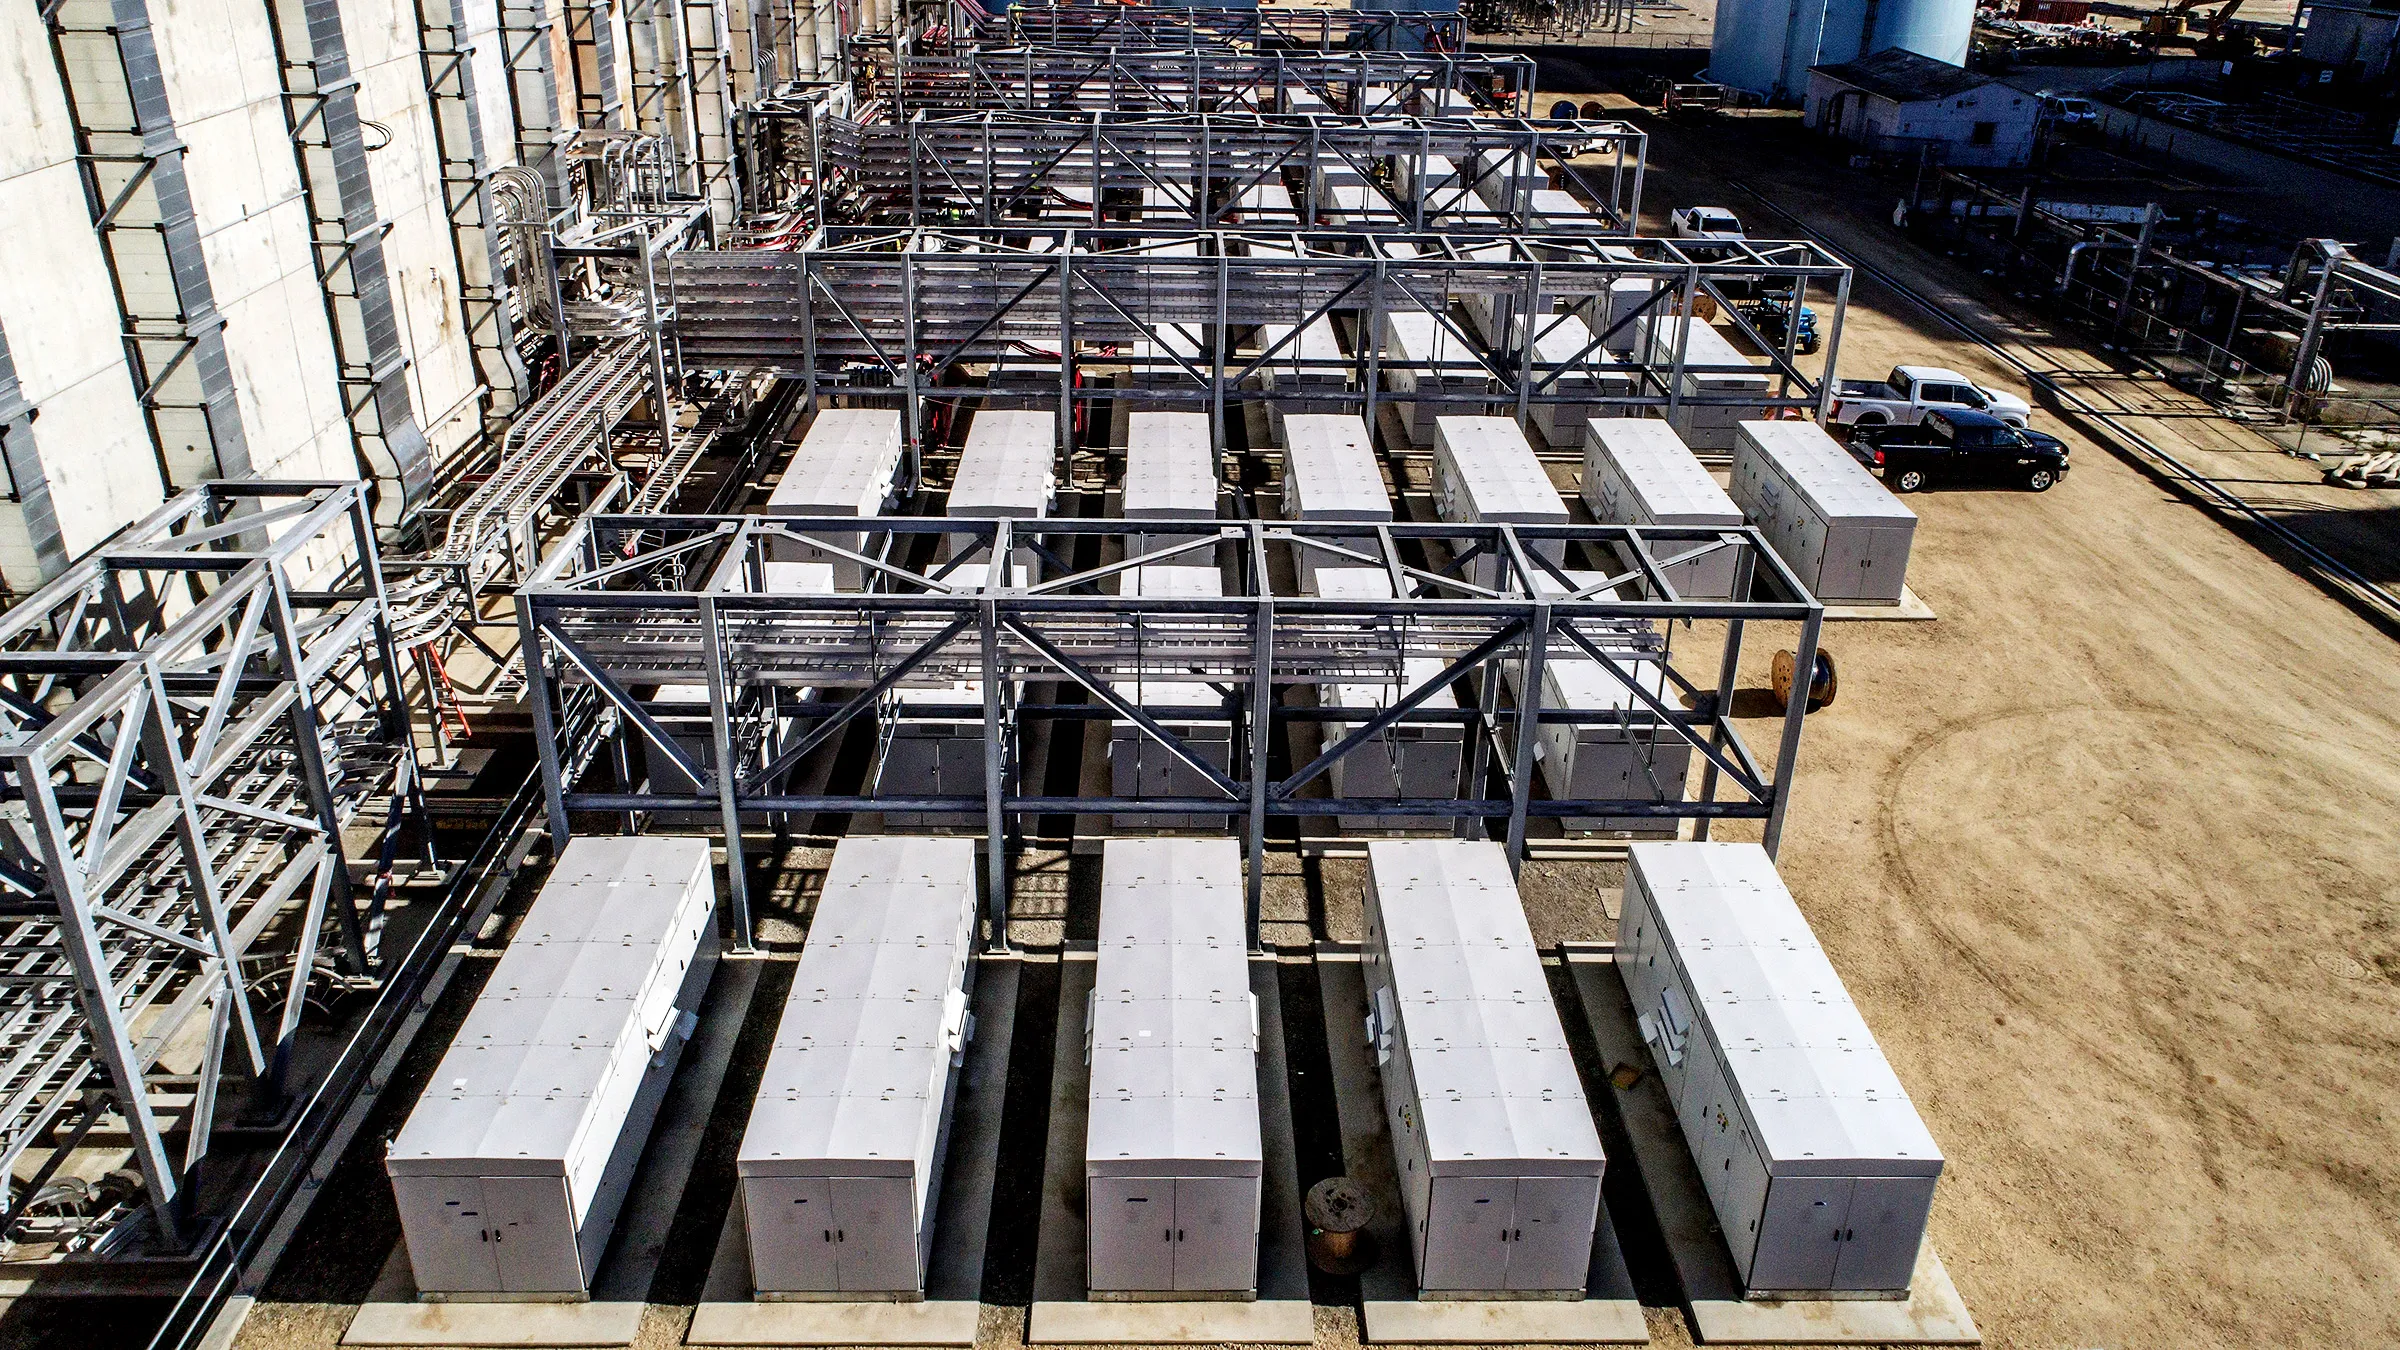 North America Poised for Massive Battery Cell Production Capacity by 2030